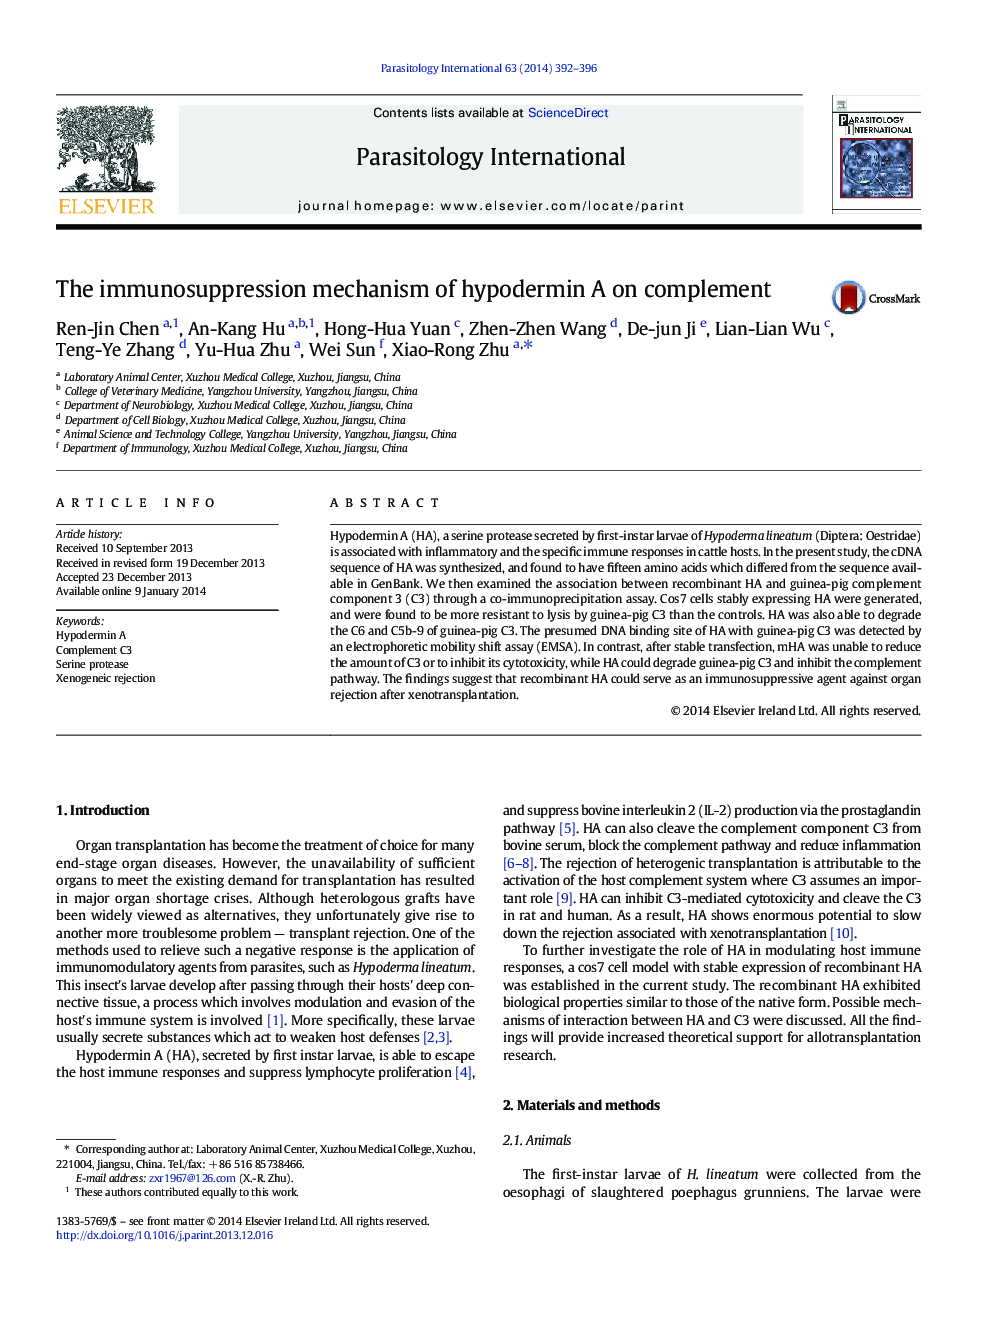 The immunosuppression mechanism of hypodermin A on complement